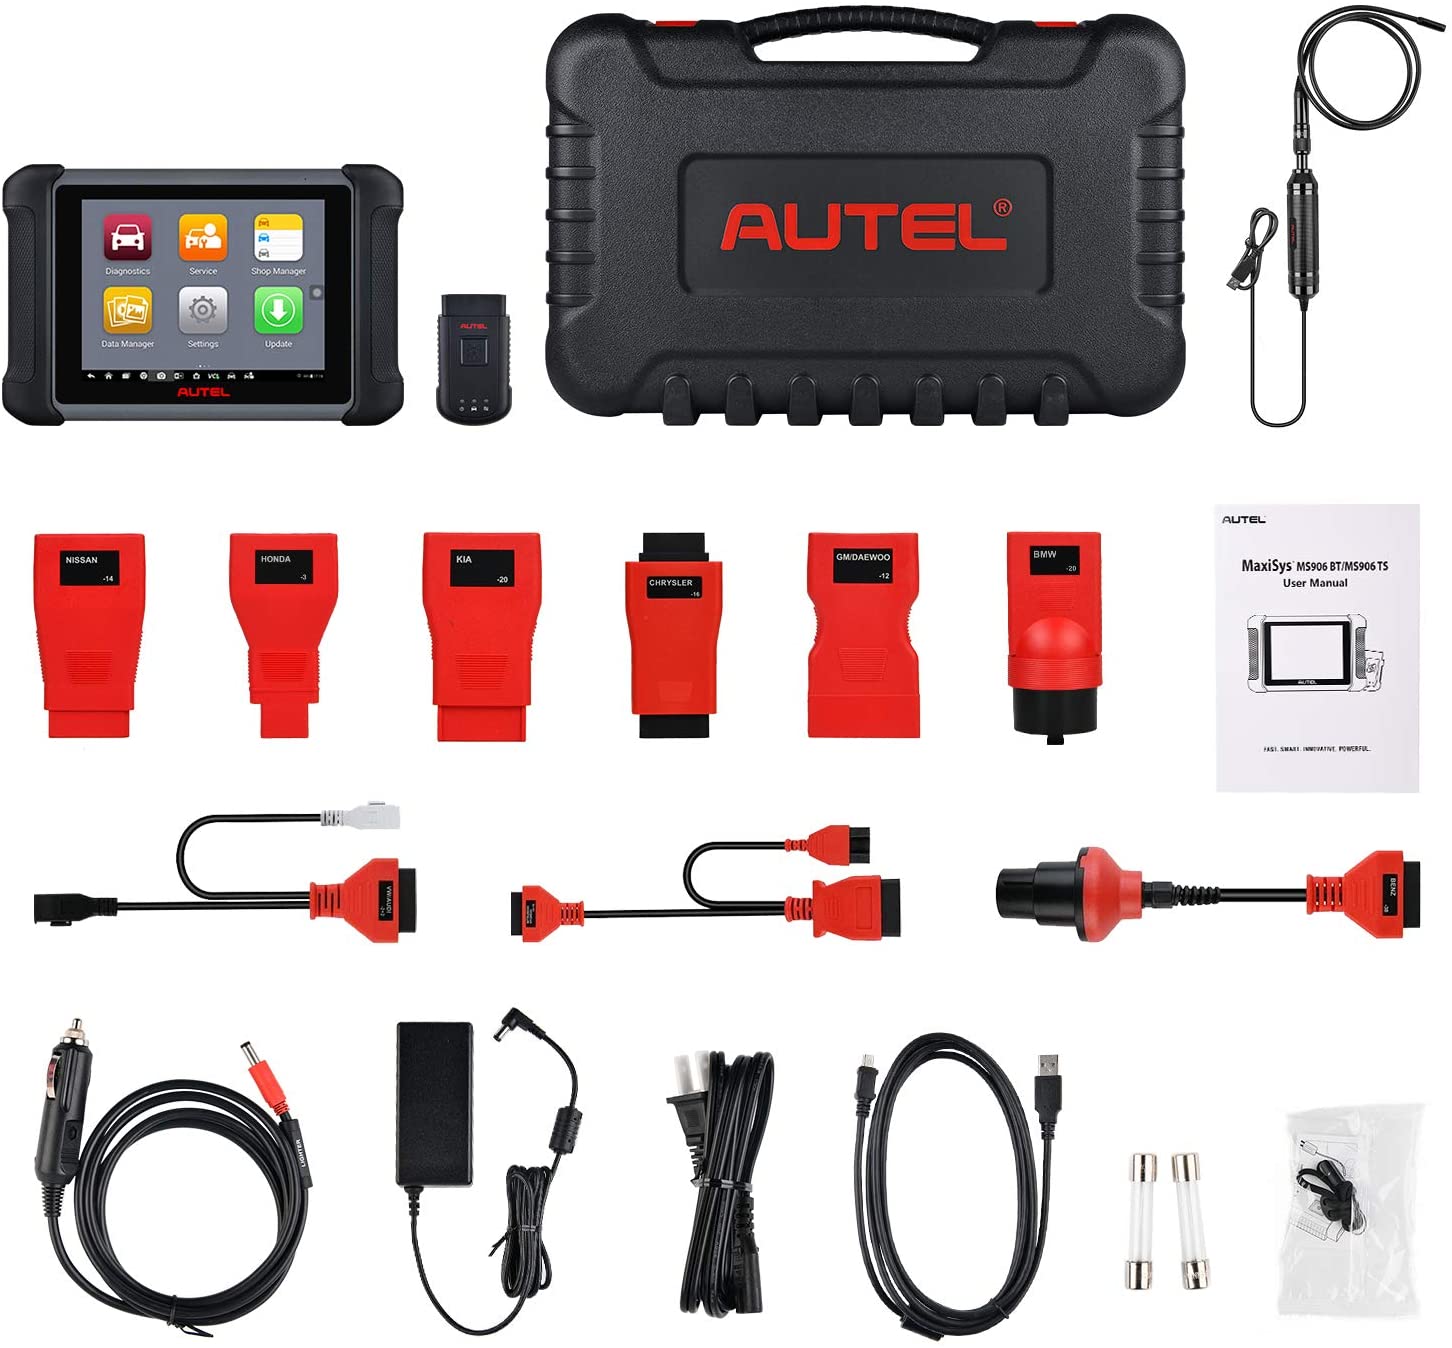 Autel Maxisys MS906BT Bluetooth OBD2 Diagnostic Tool Scanner Key Coding Upgraded Version of MS906 